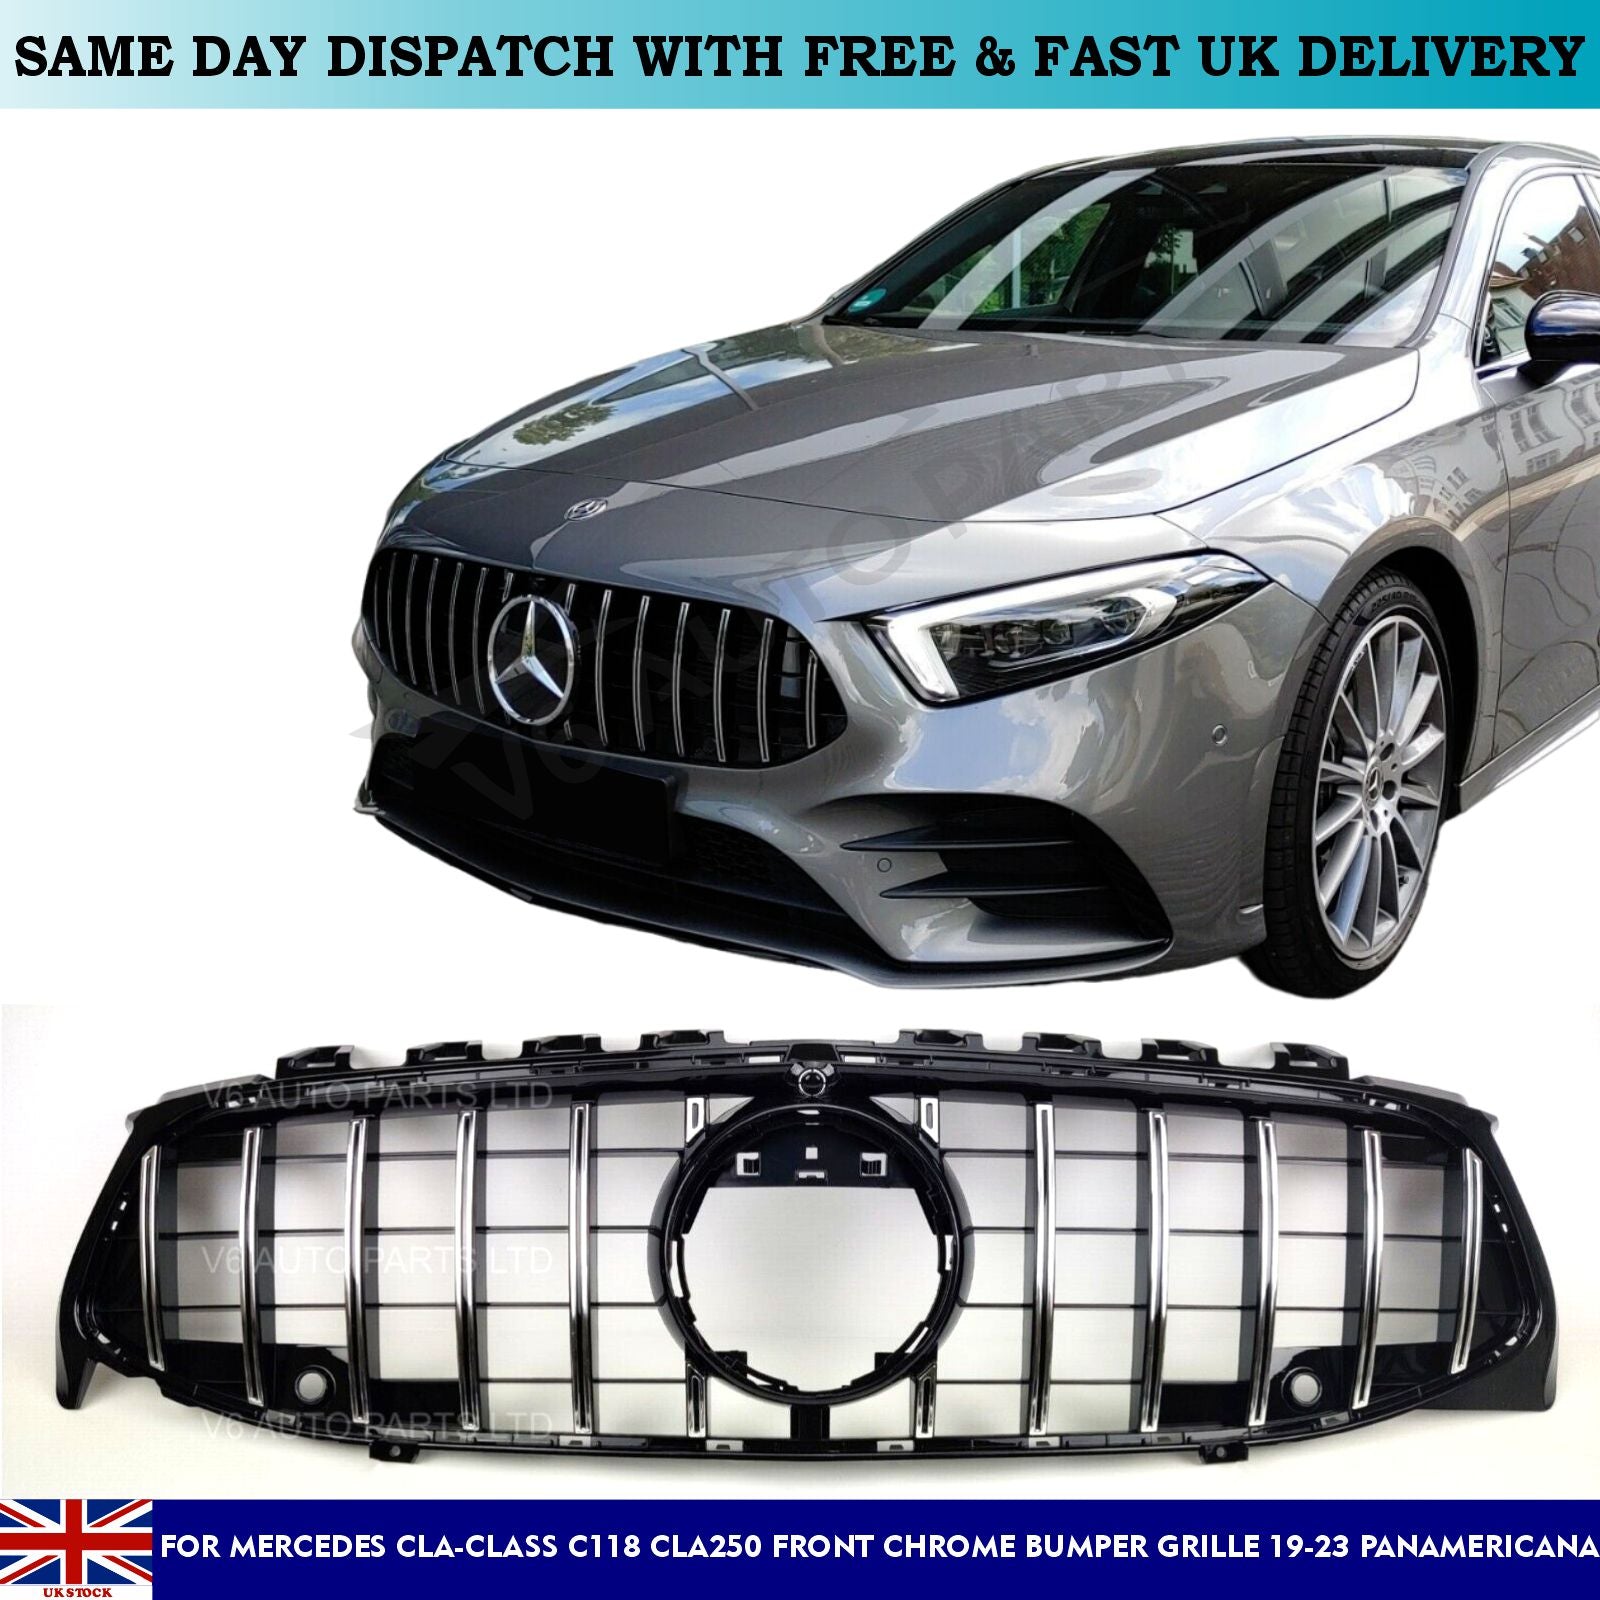 For Mercedes CLA-Class X118 CLA200d Front Radiator GT Grille 2019-2023 Facelift